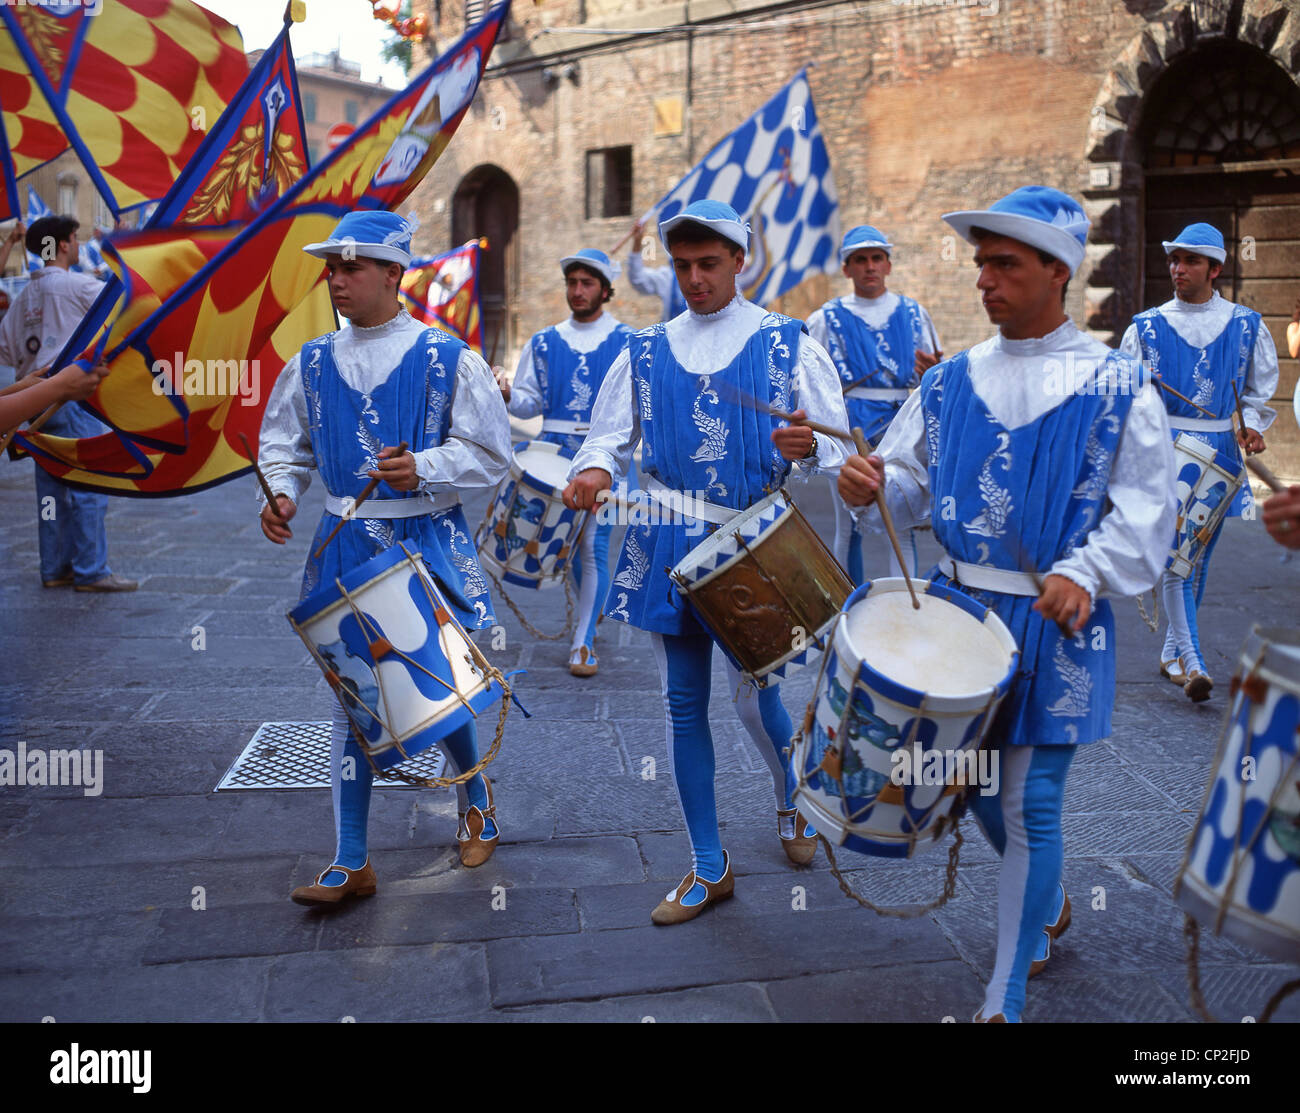 Marching band at The Palio di Siena festival, Siena, Province of Siena, Tuscany Region, Italy Stock Photo